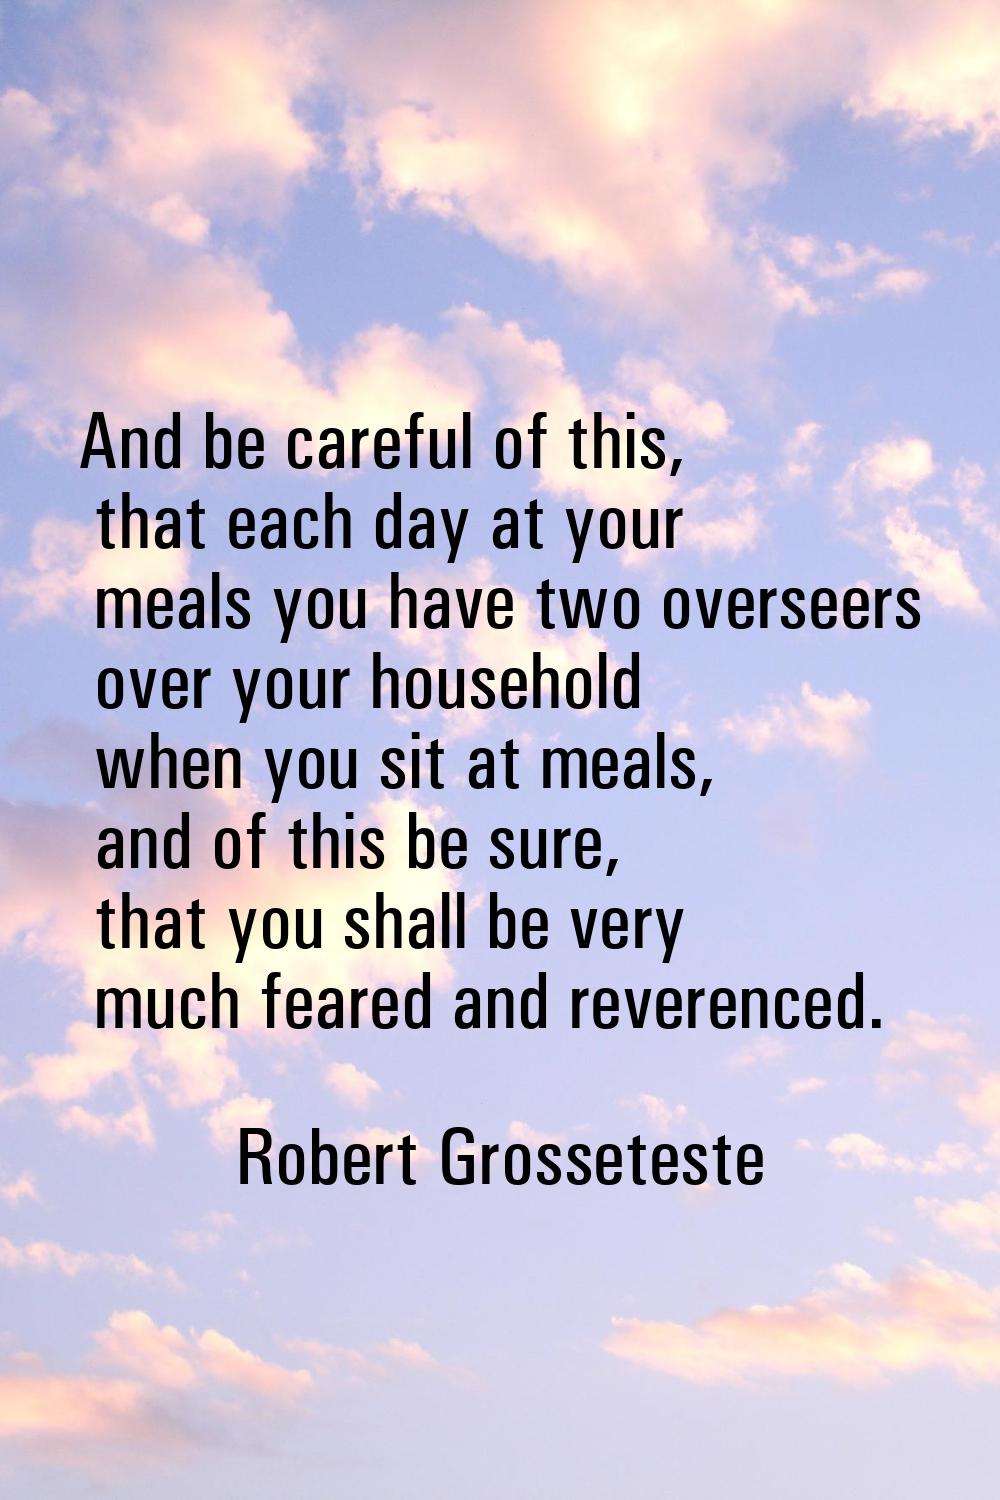 And be careful of this, that each day at your meals you have two overseers over your household when